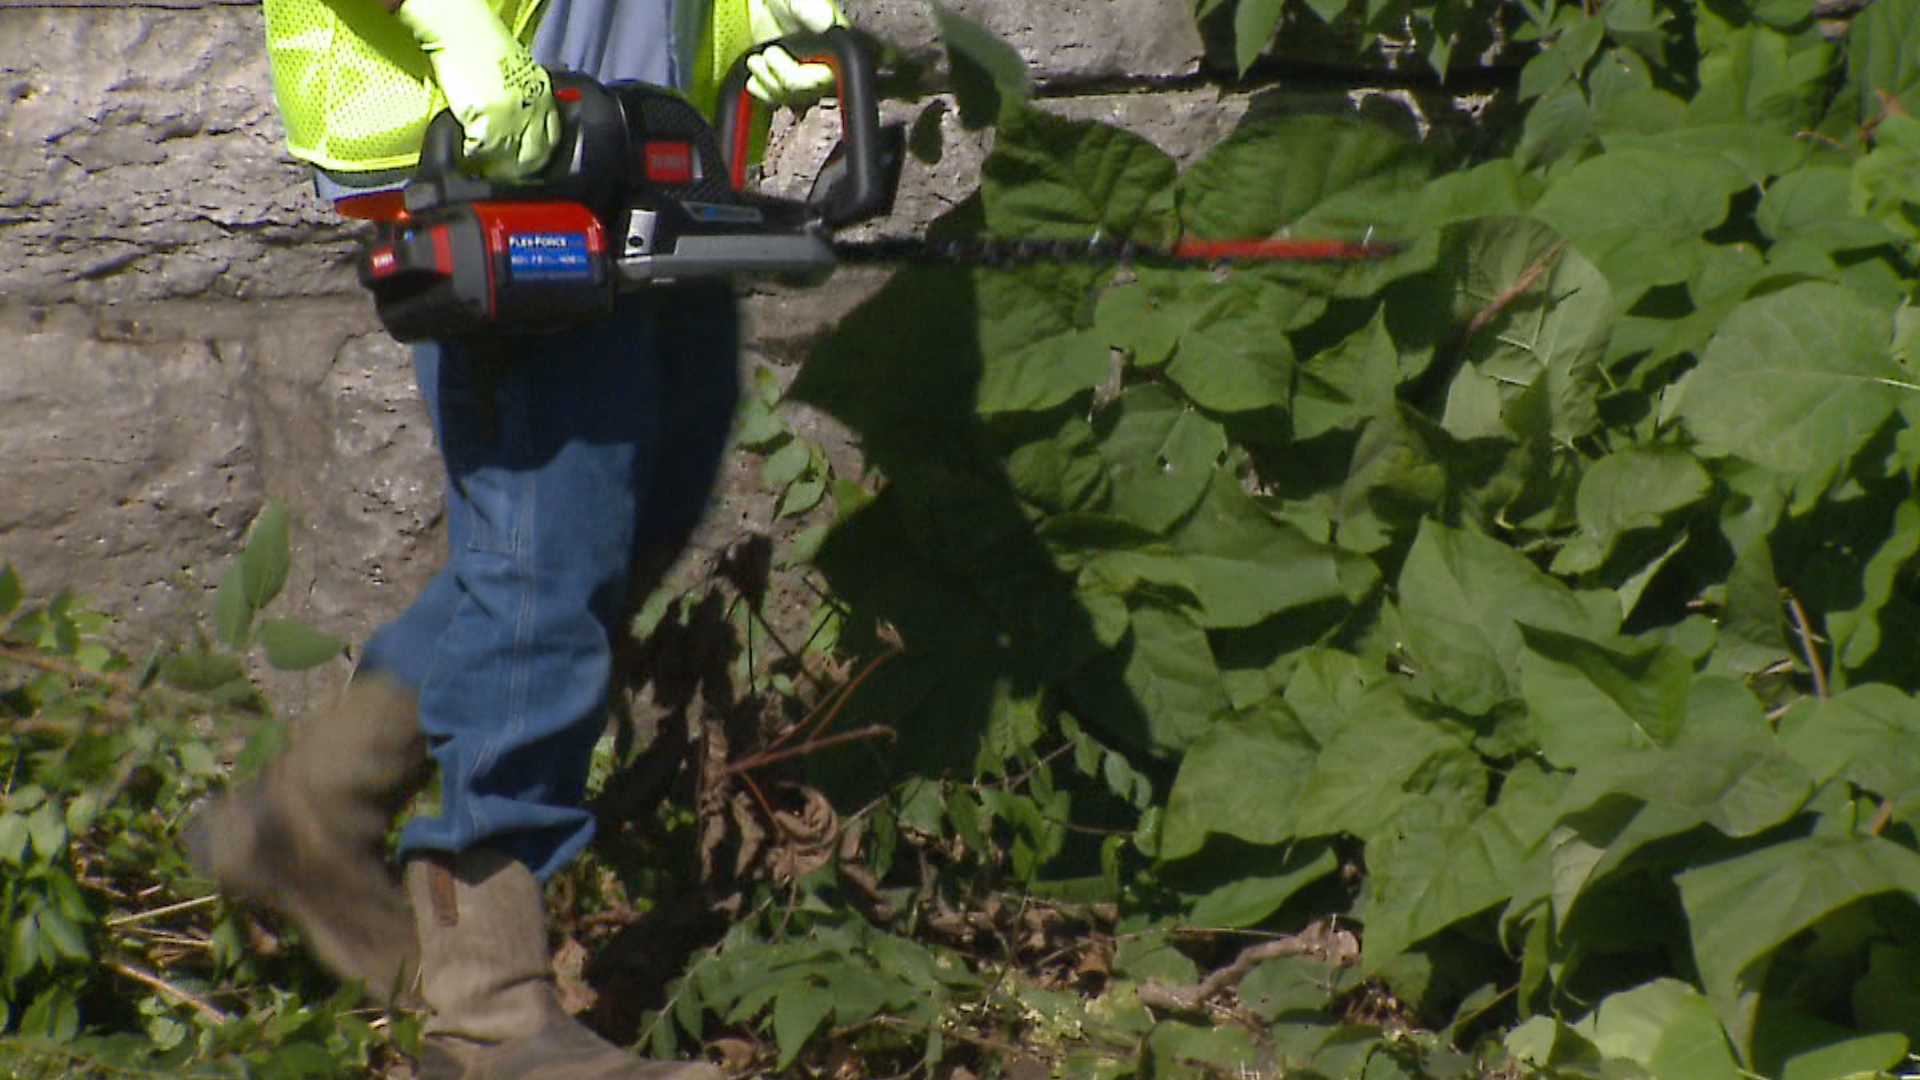 Indianapolis Public Works uses new electric maintenance equipment